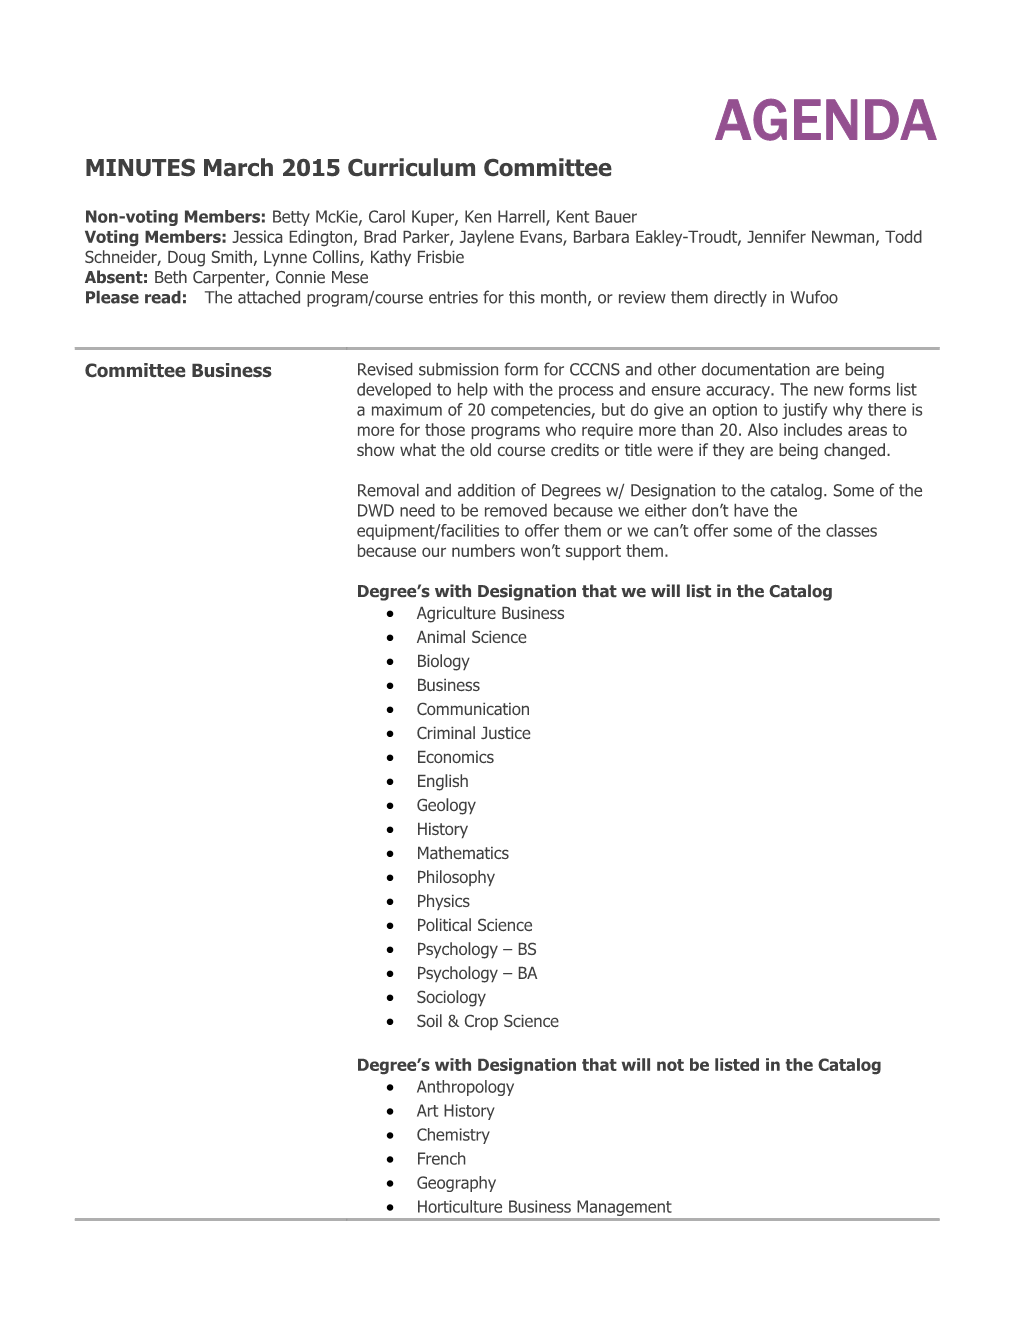 MINUTES March 2015 Curriculum Committee